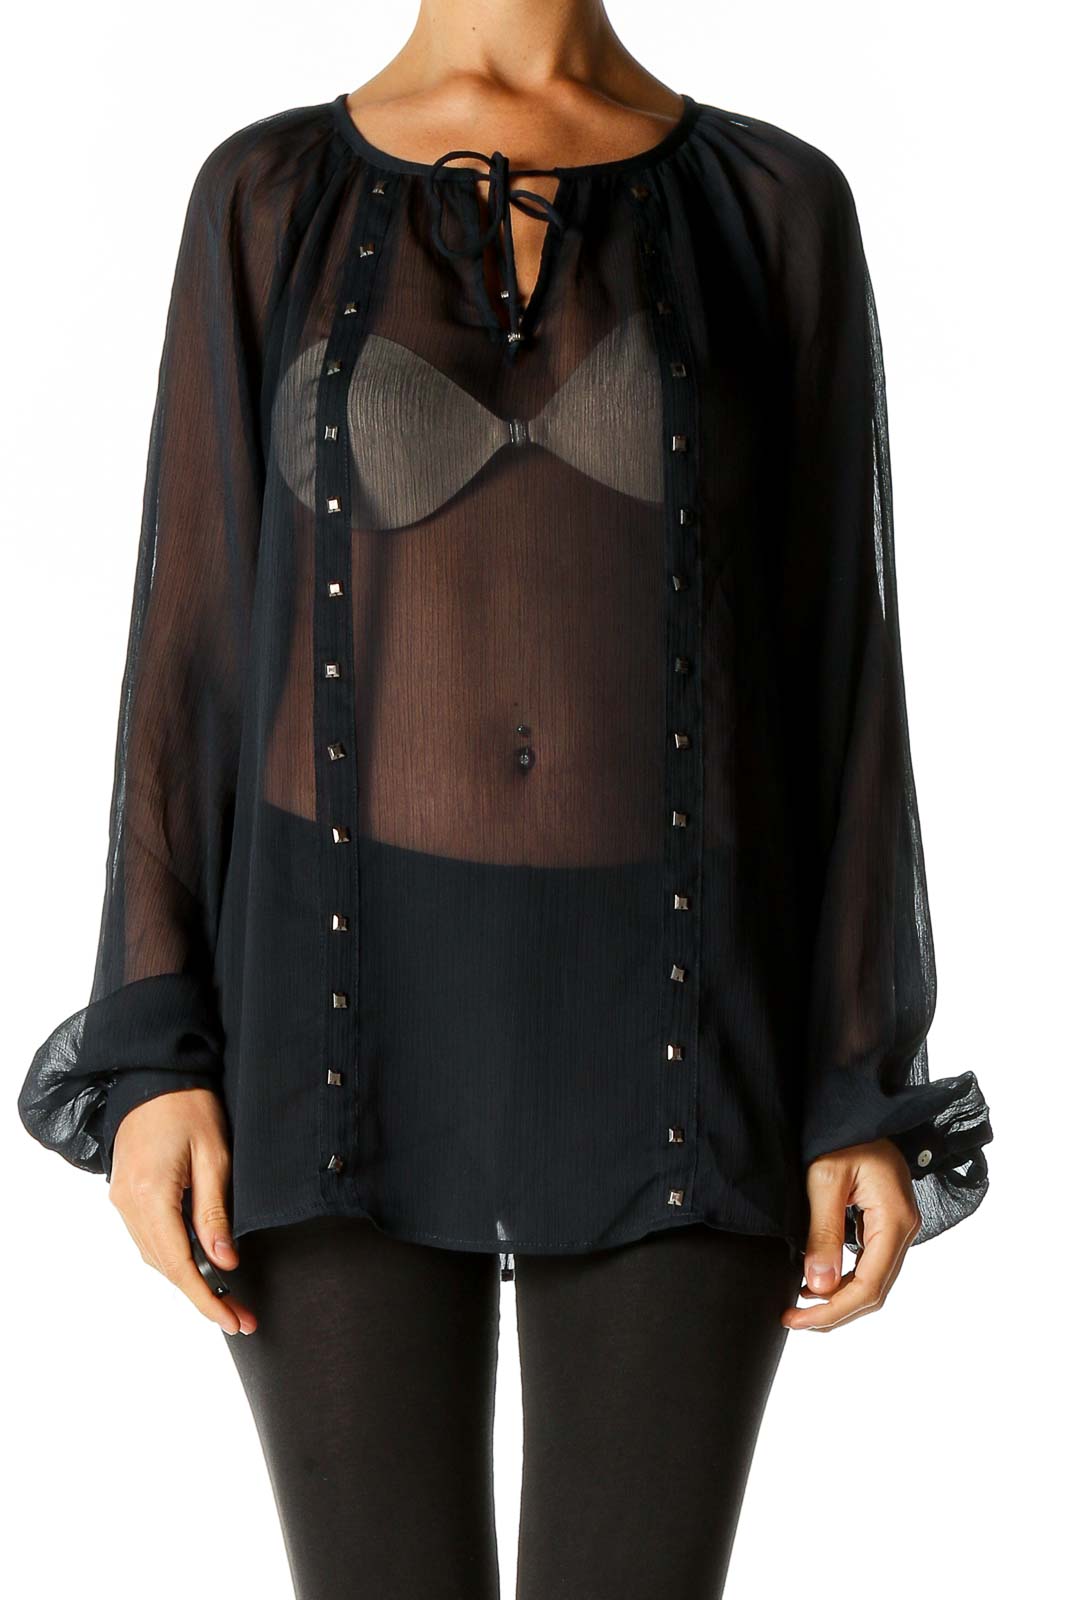 Black Solid Chic Blouse Front